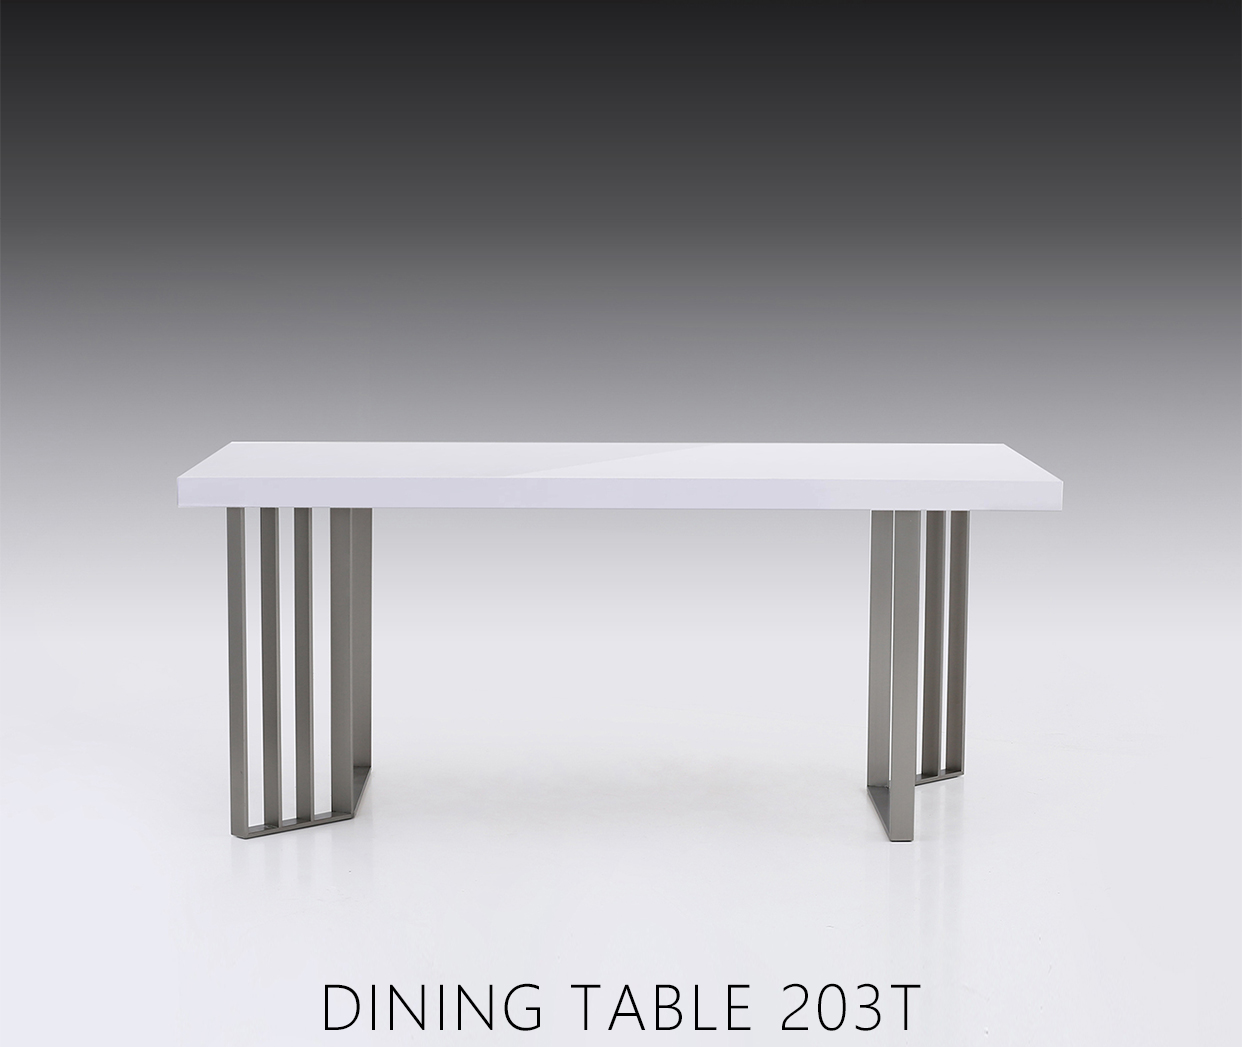 DINING TABLE 203T